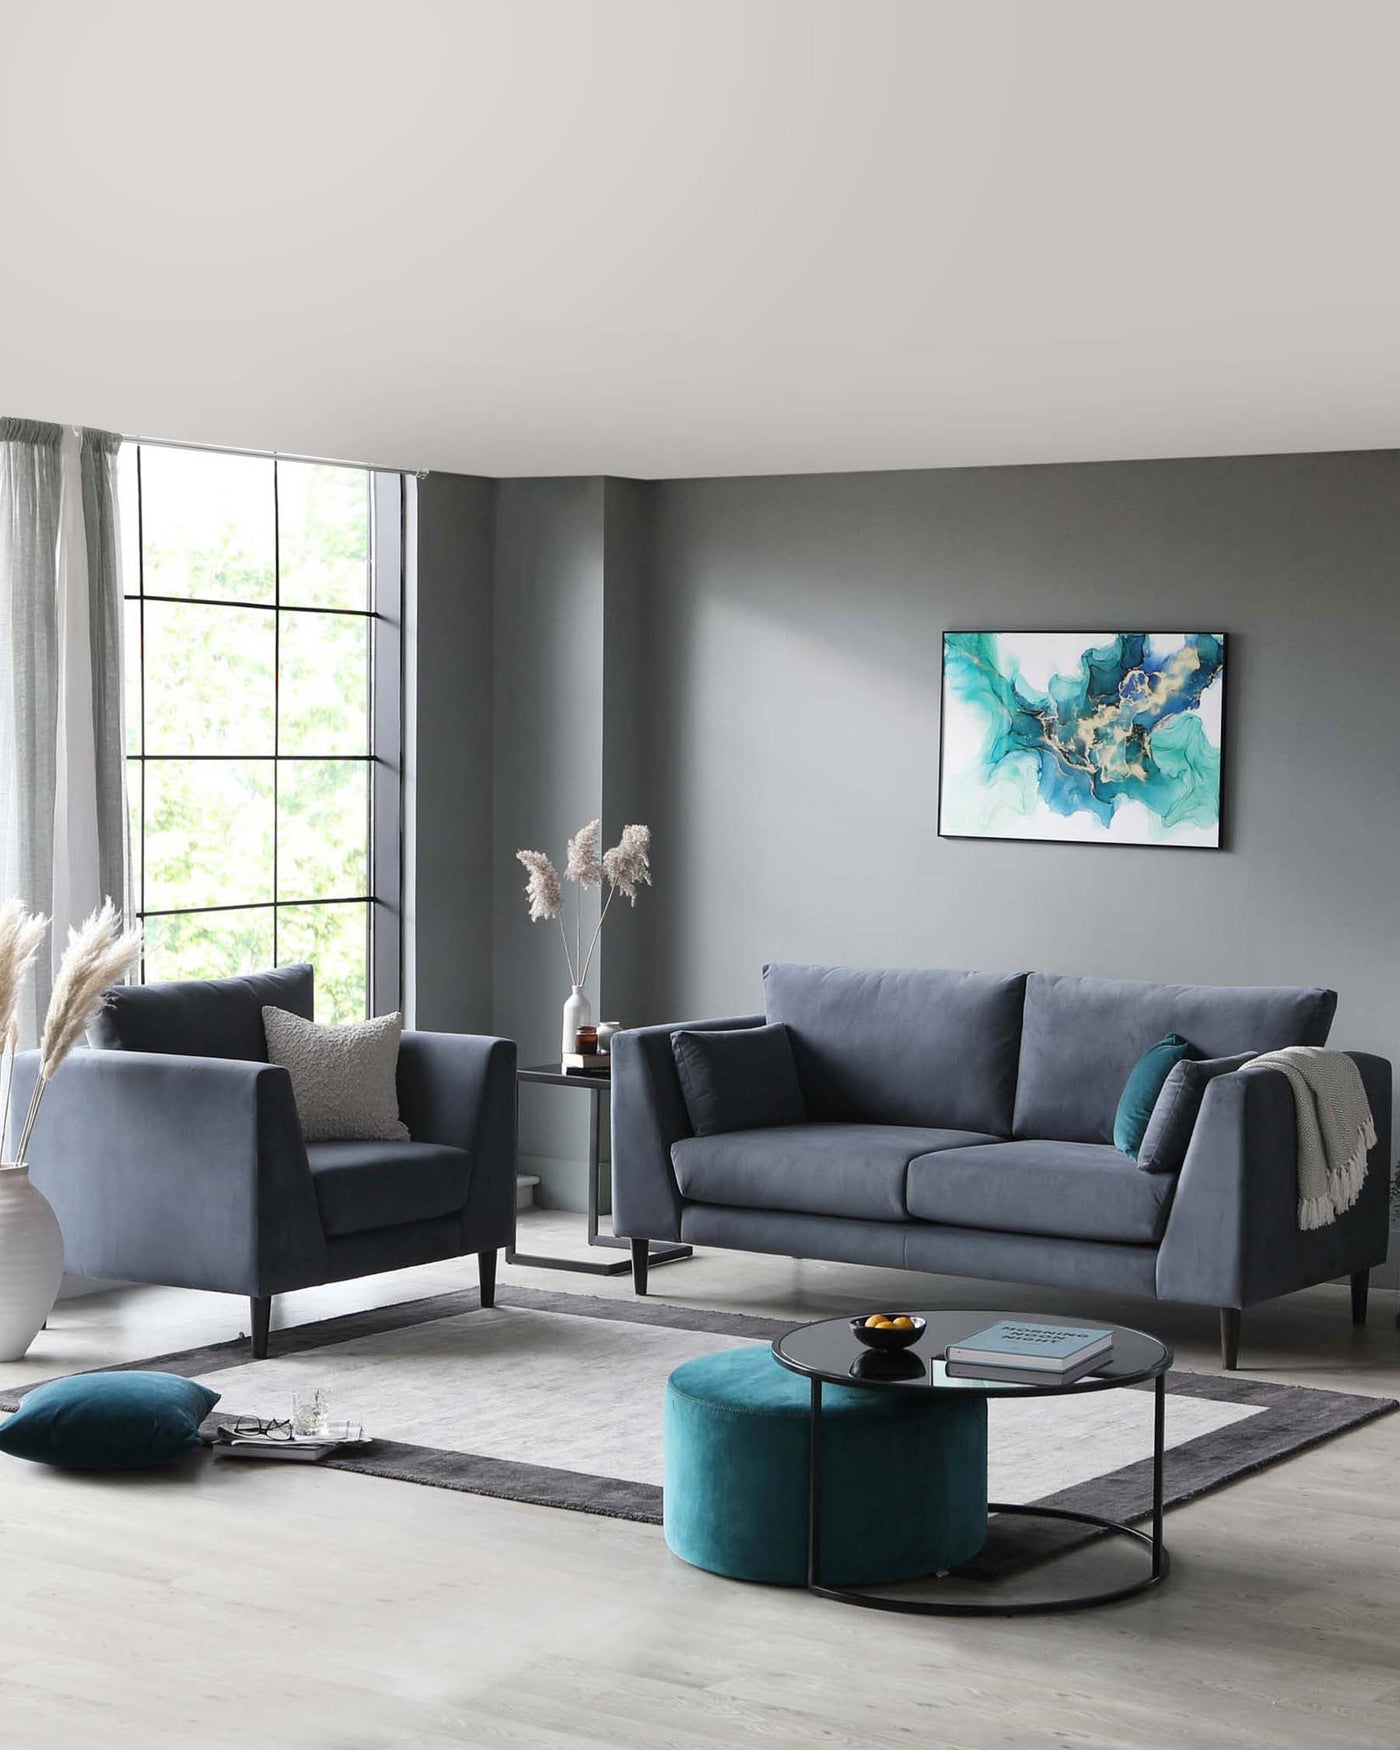 Modern living room set with a dark grey upholstered sofa and two matching armchairs. A round, black metal-framed coffee tabl